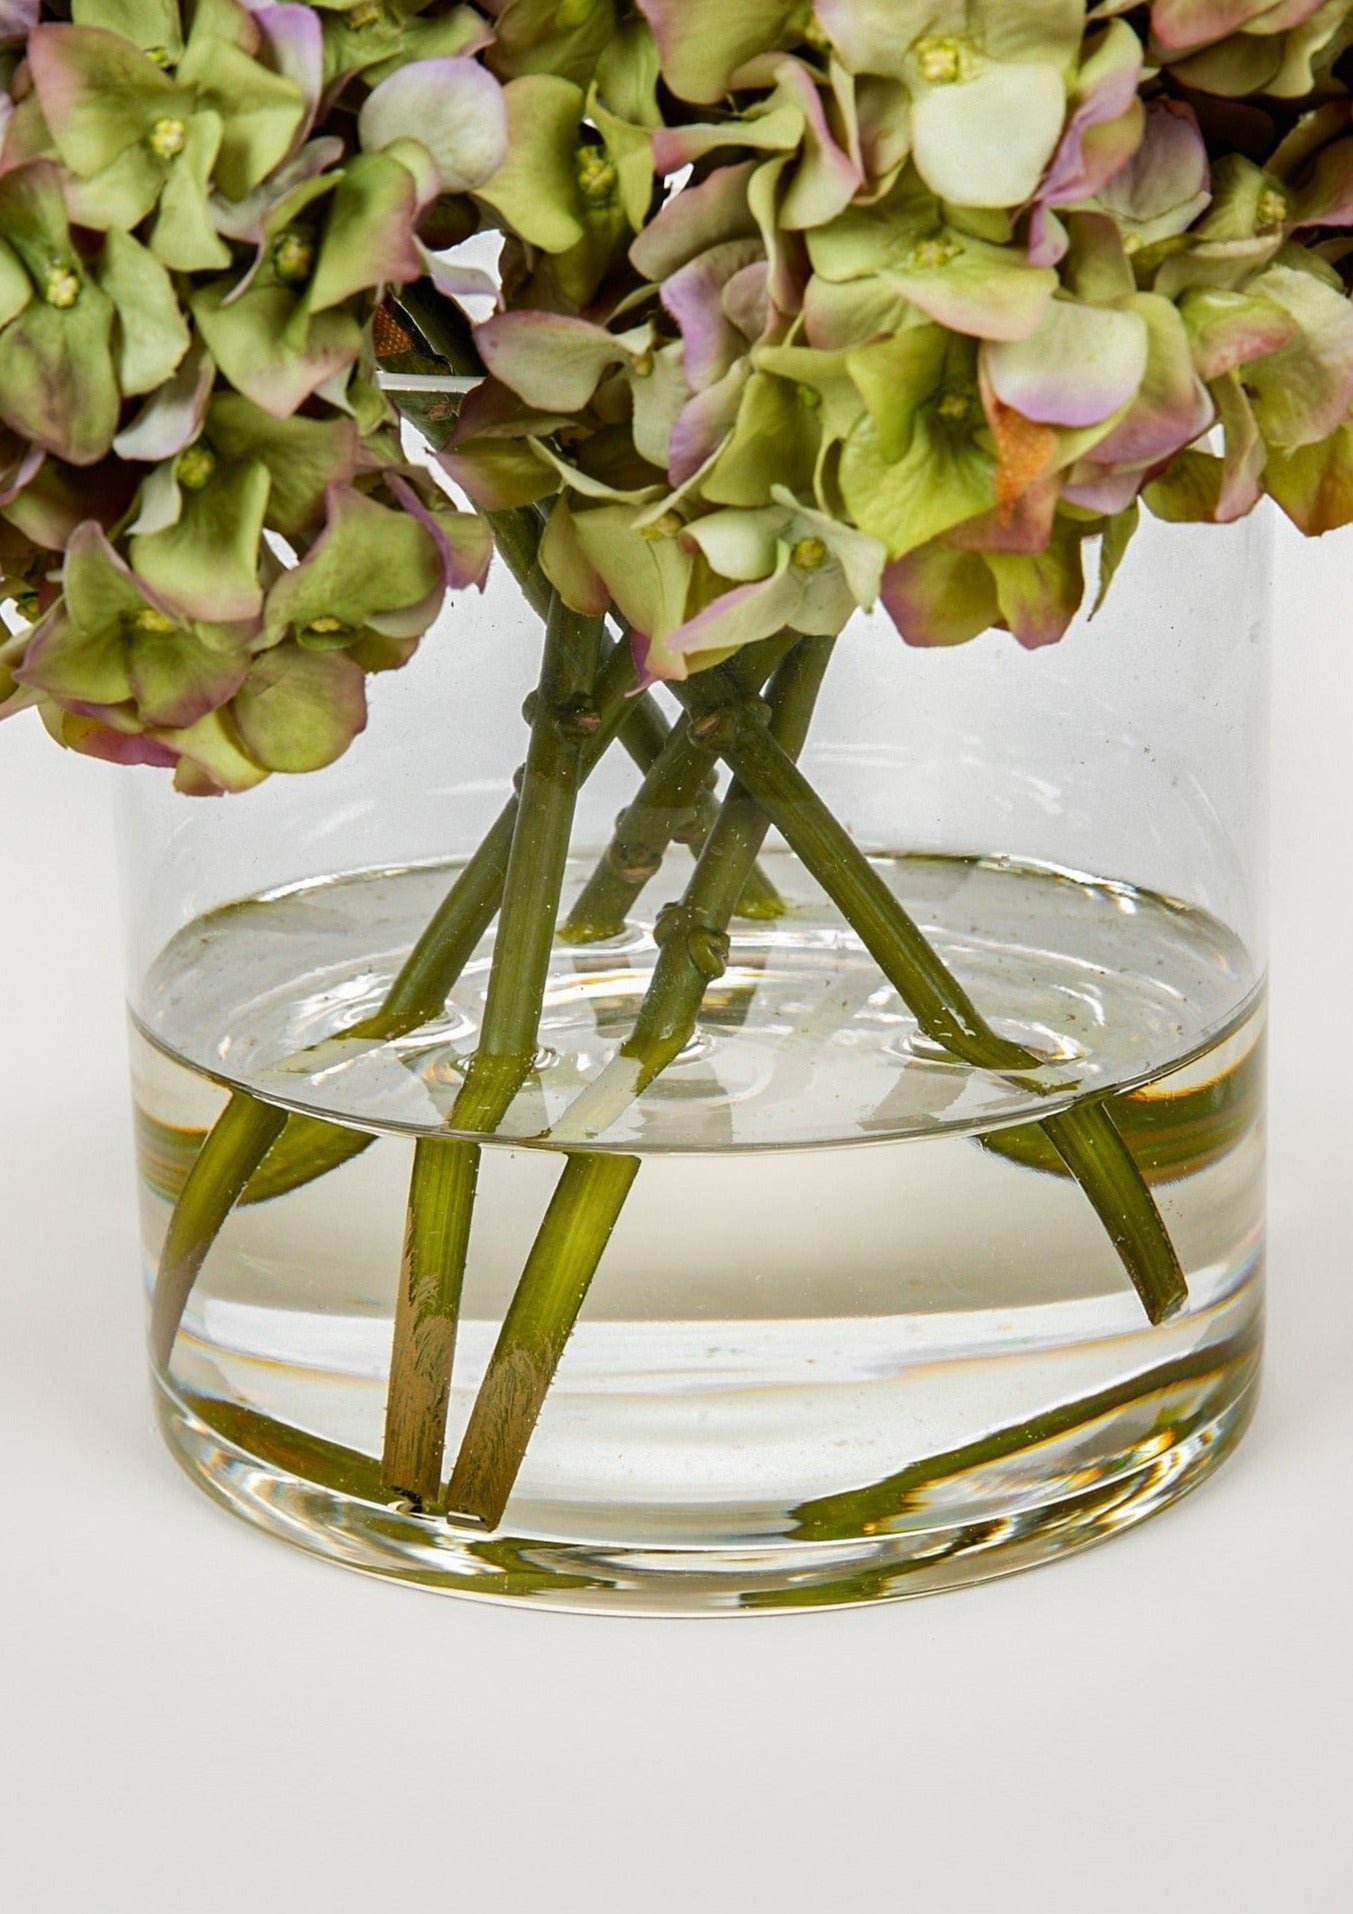 Afloral Closeup of Glass Vase and Acrylic Water in Faux Hydrangea Flower Arrangement